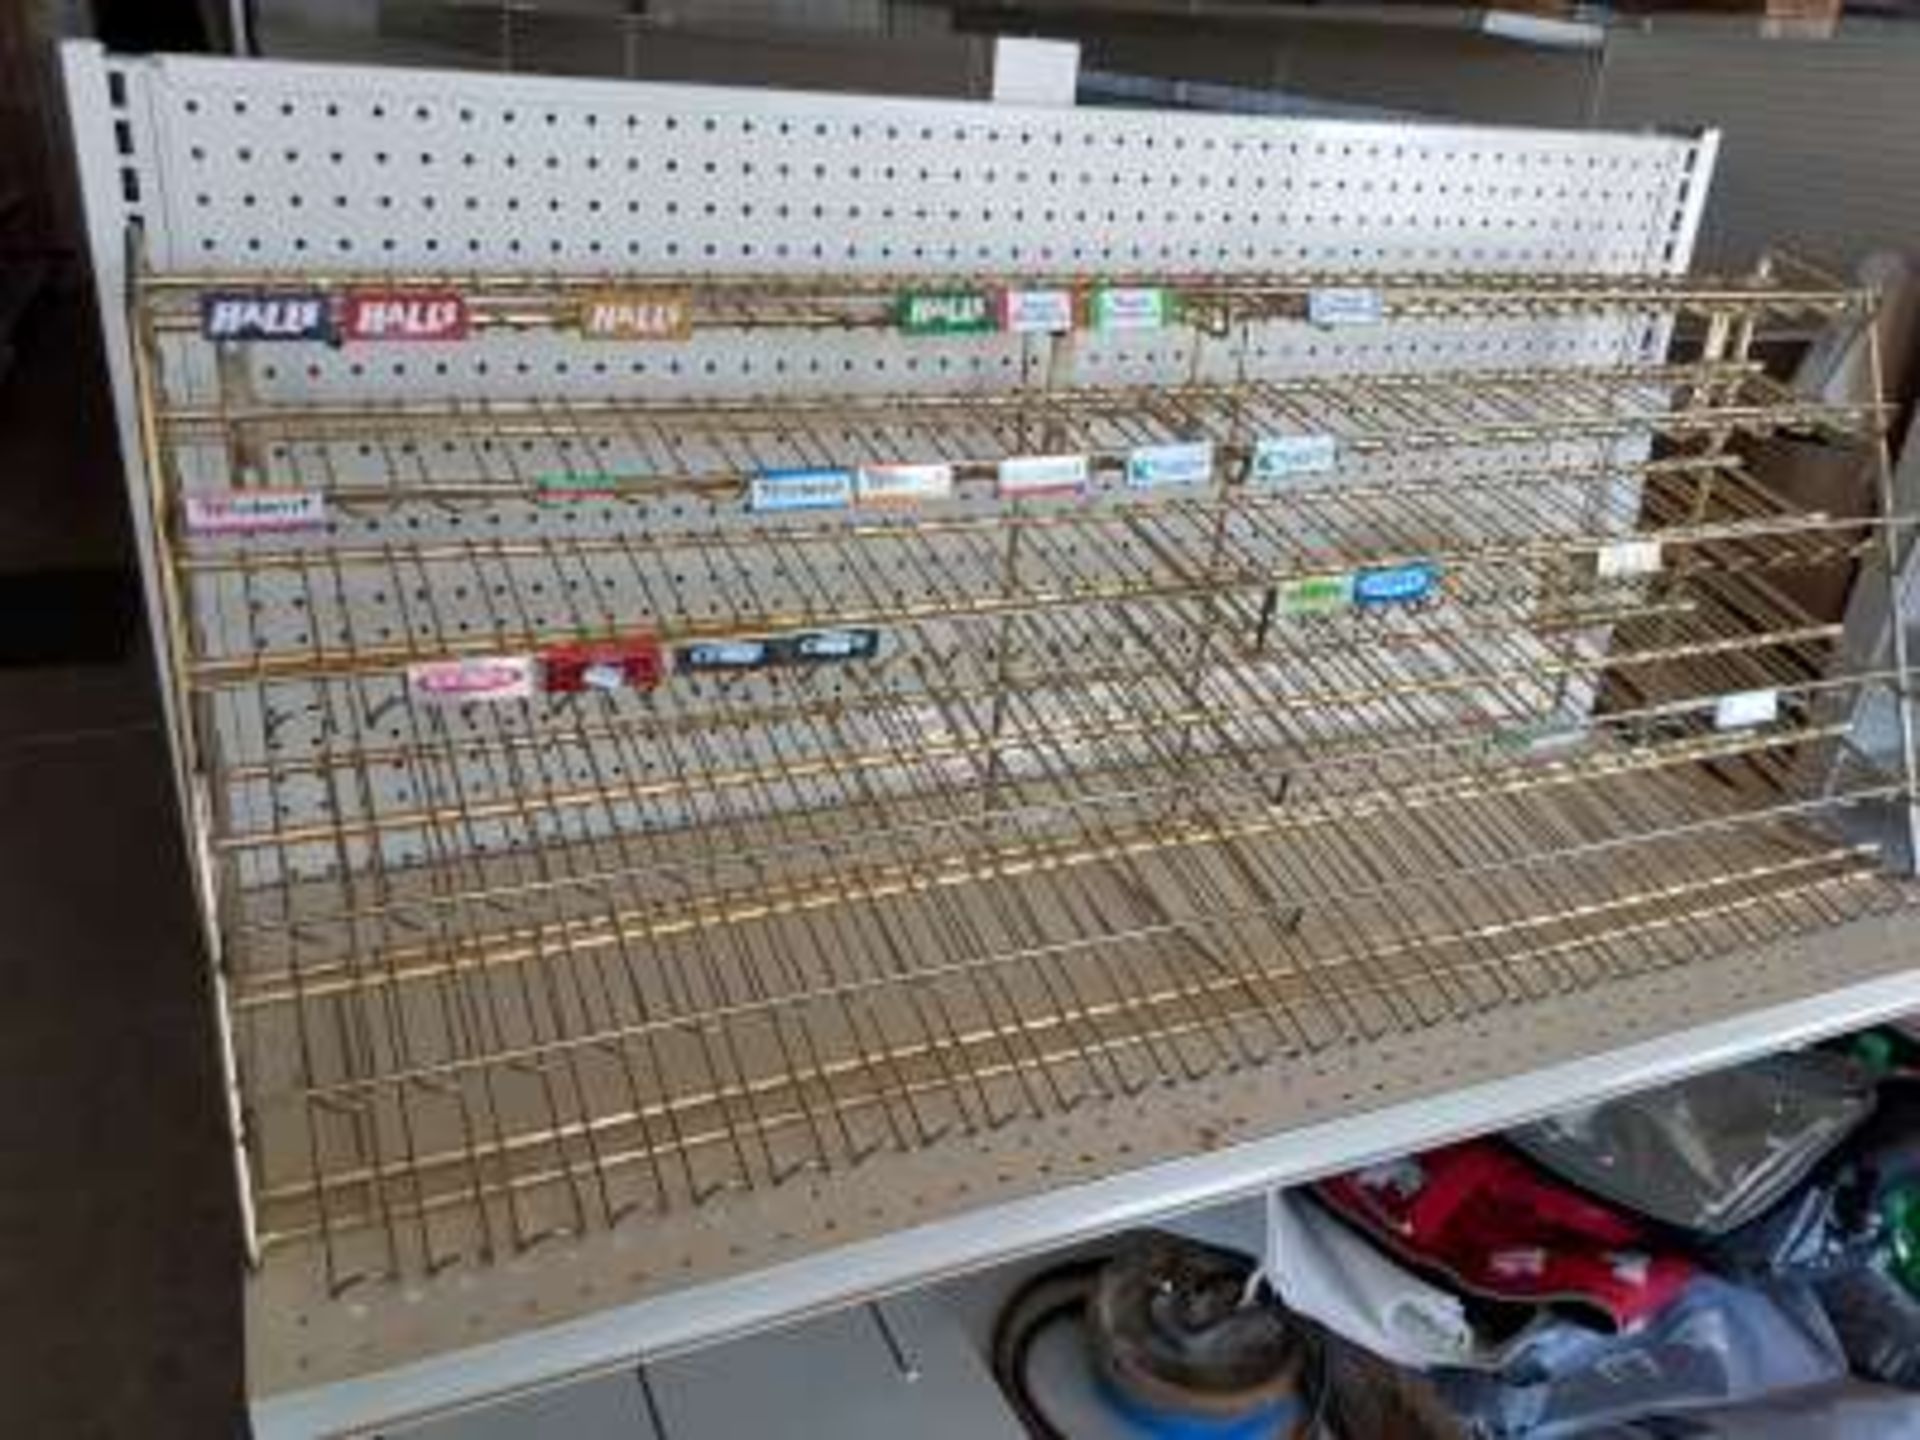 Wire candy/gum rack(4ft wide x 18 in high x 12 in deep)